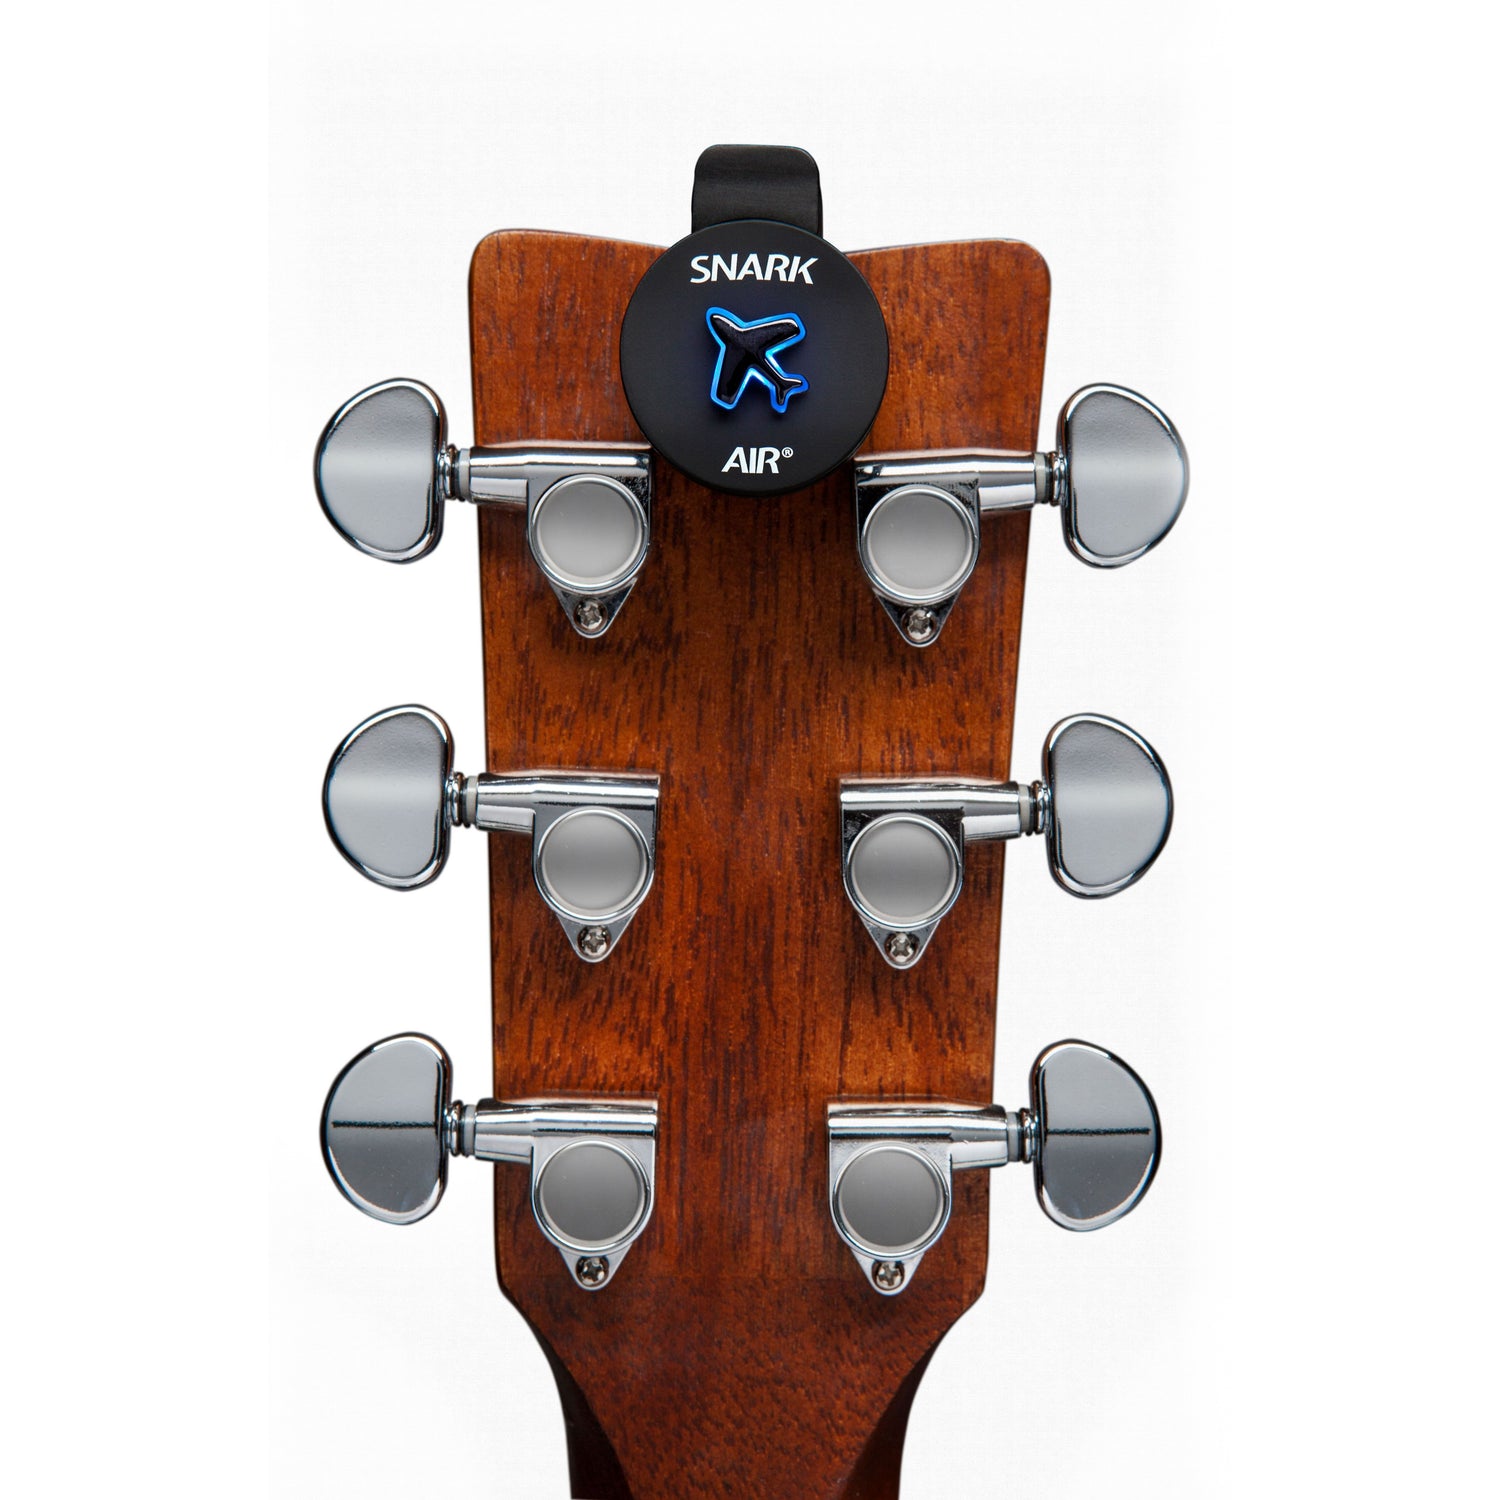 Snark Air Rechargable Clip-On Tuner on back of headstock